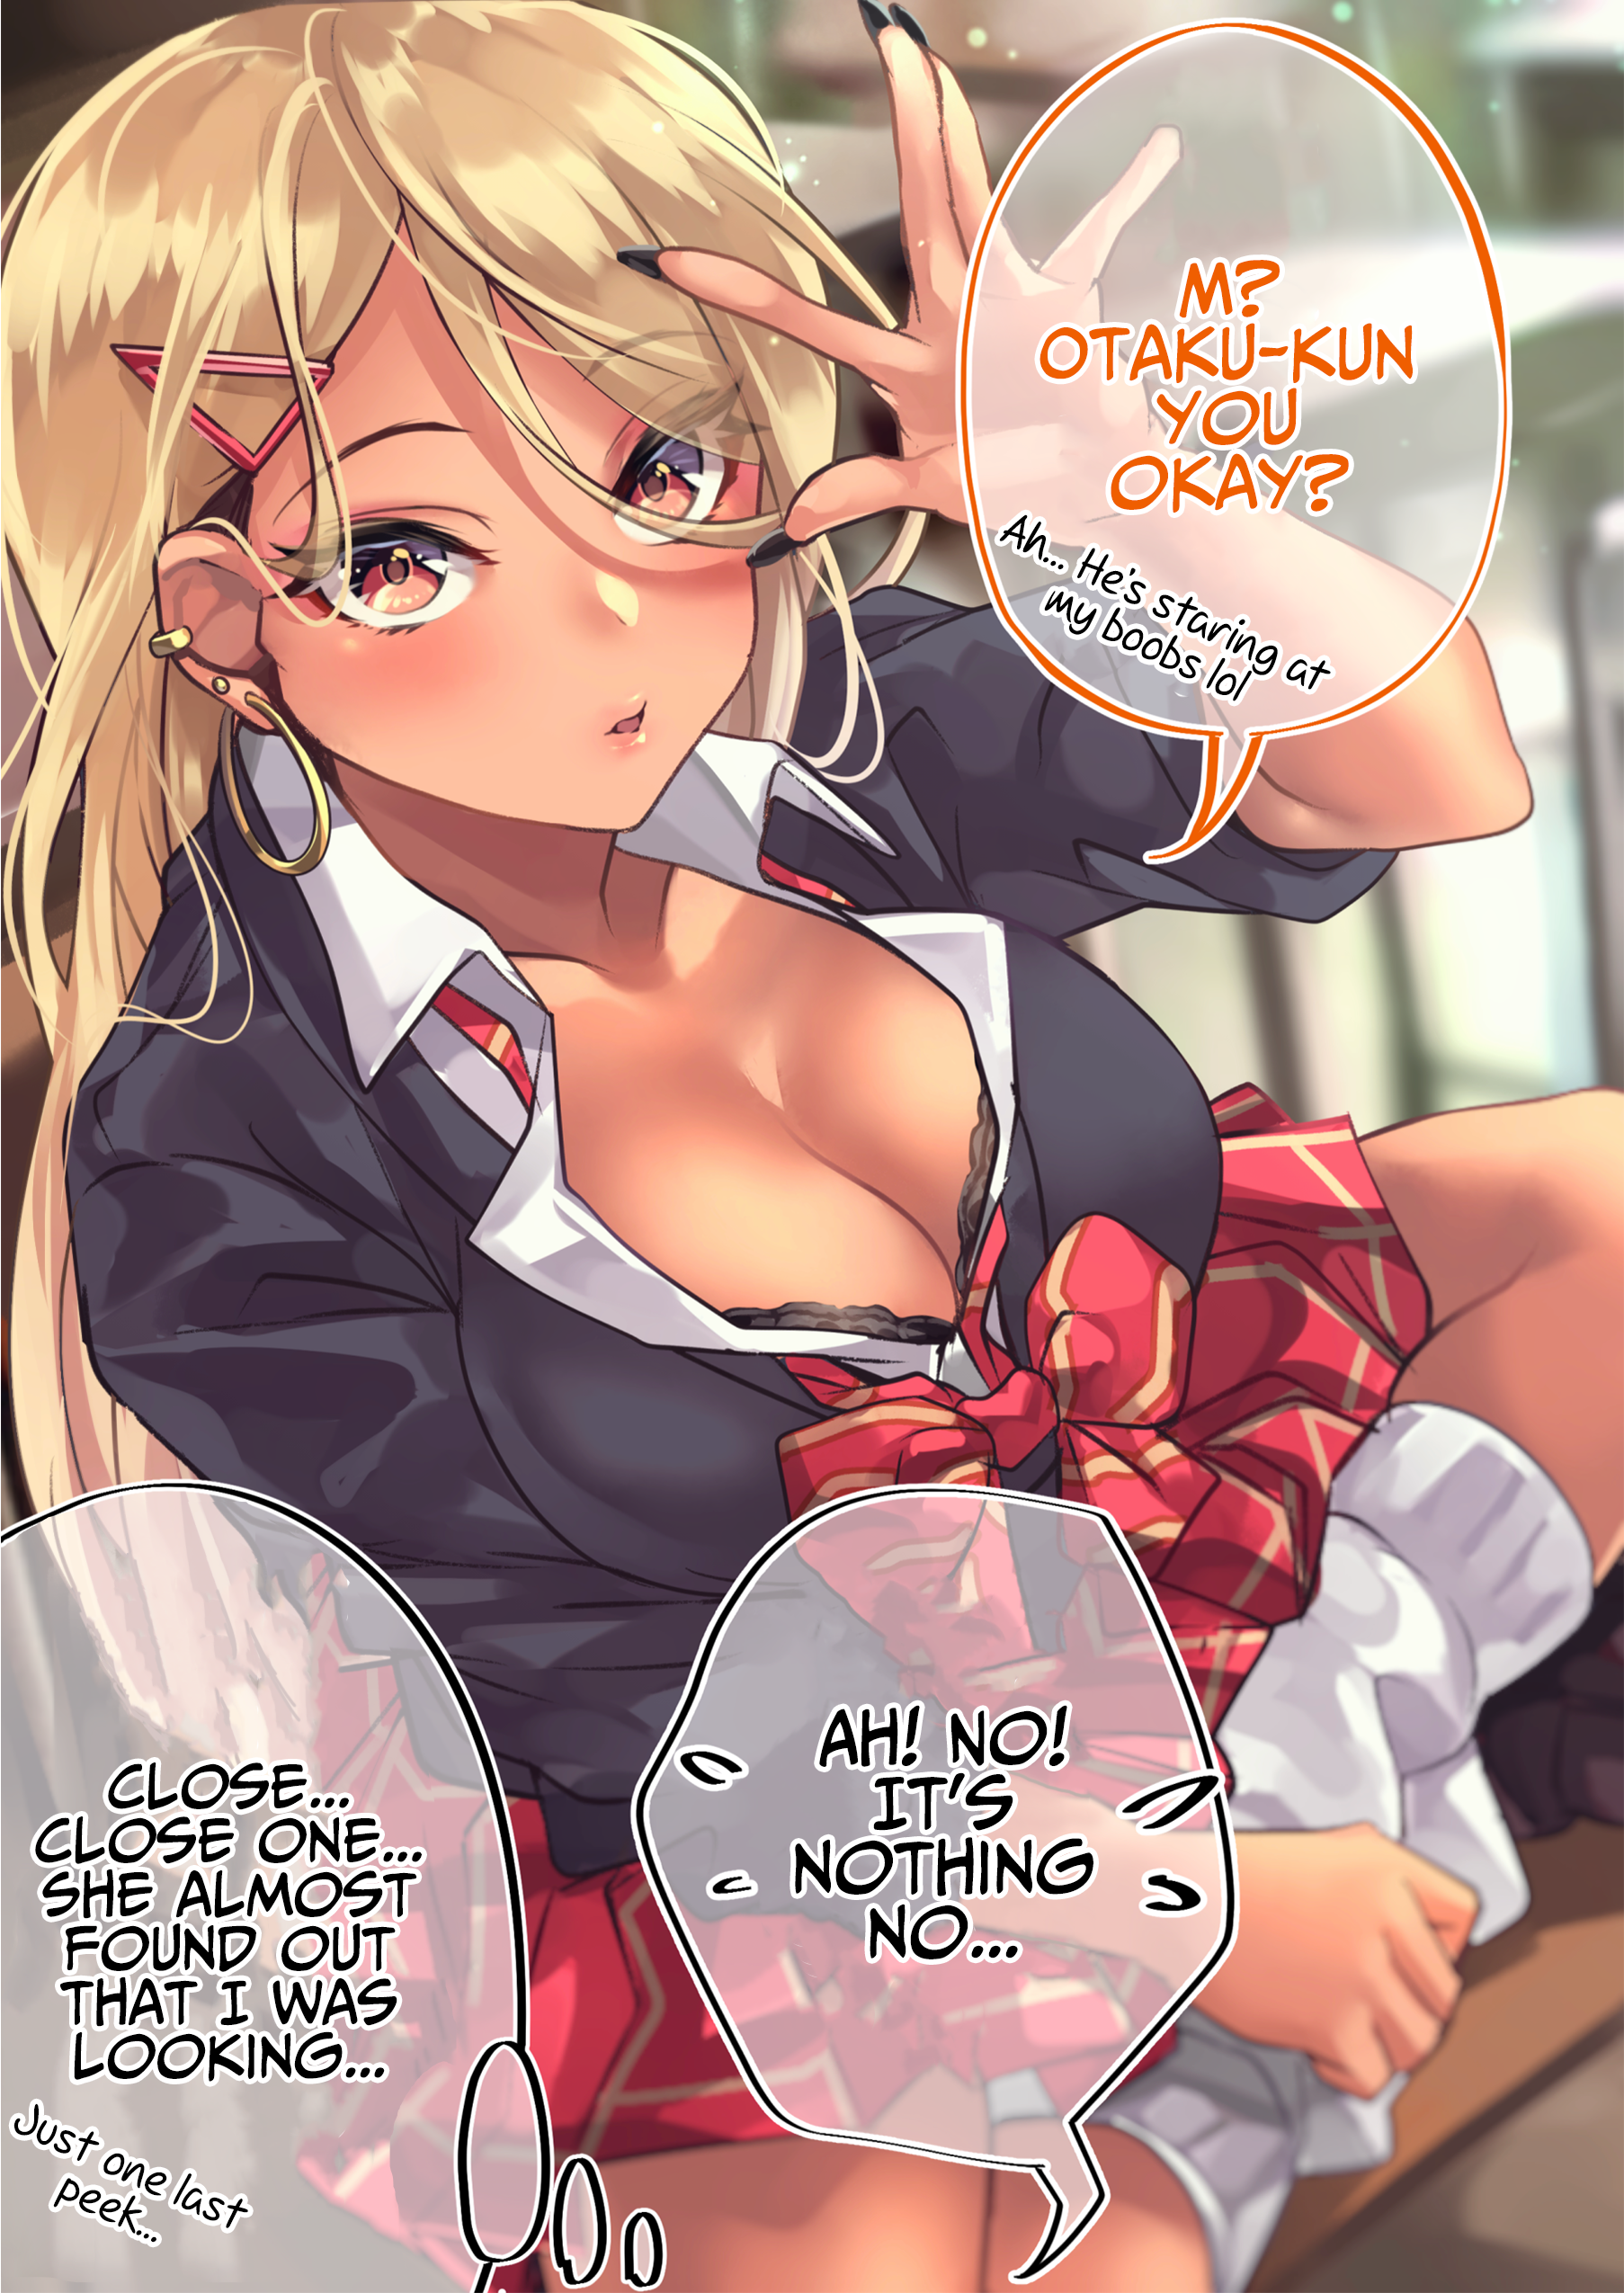 The Story Of An Otaku And A Gyaru Falling In Love - 5 page 2